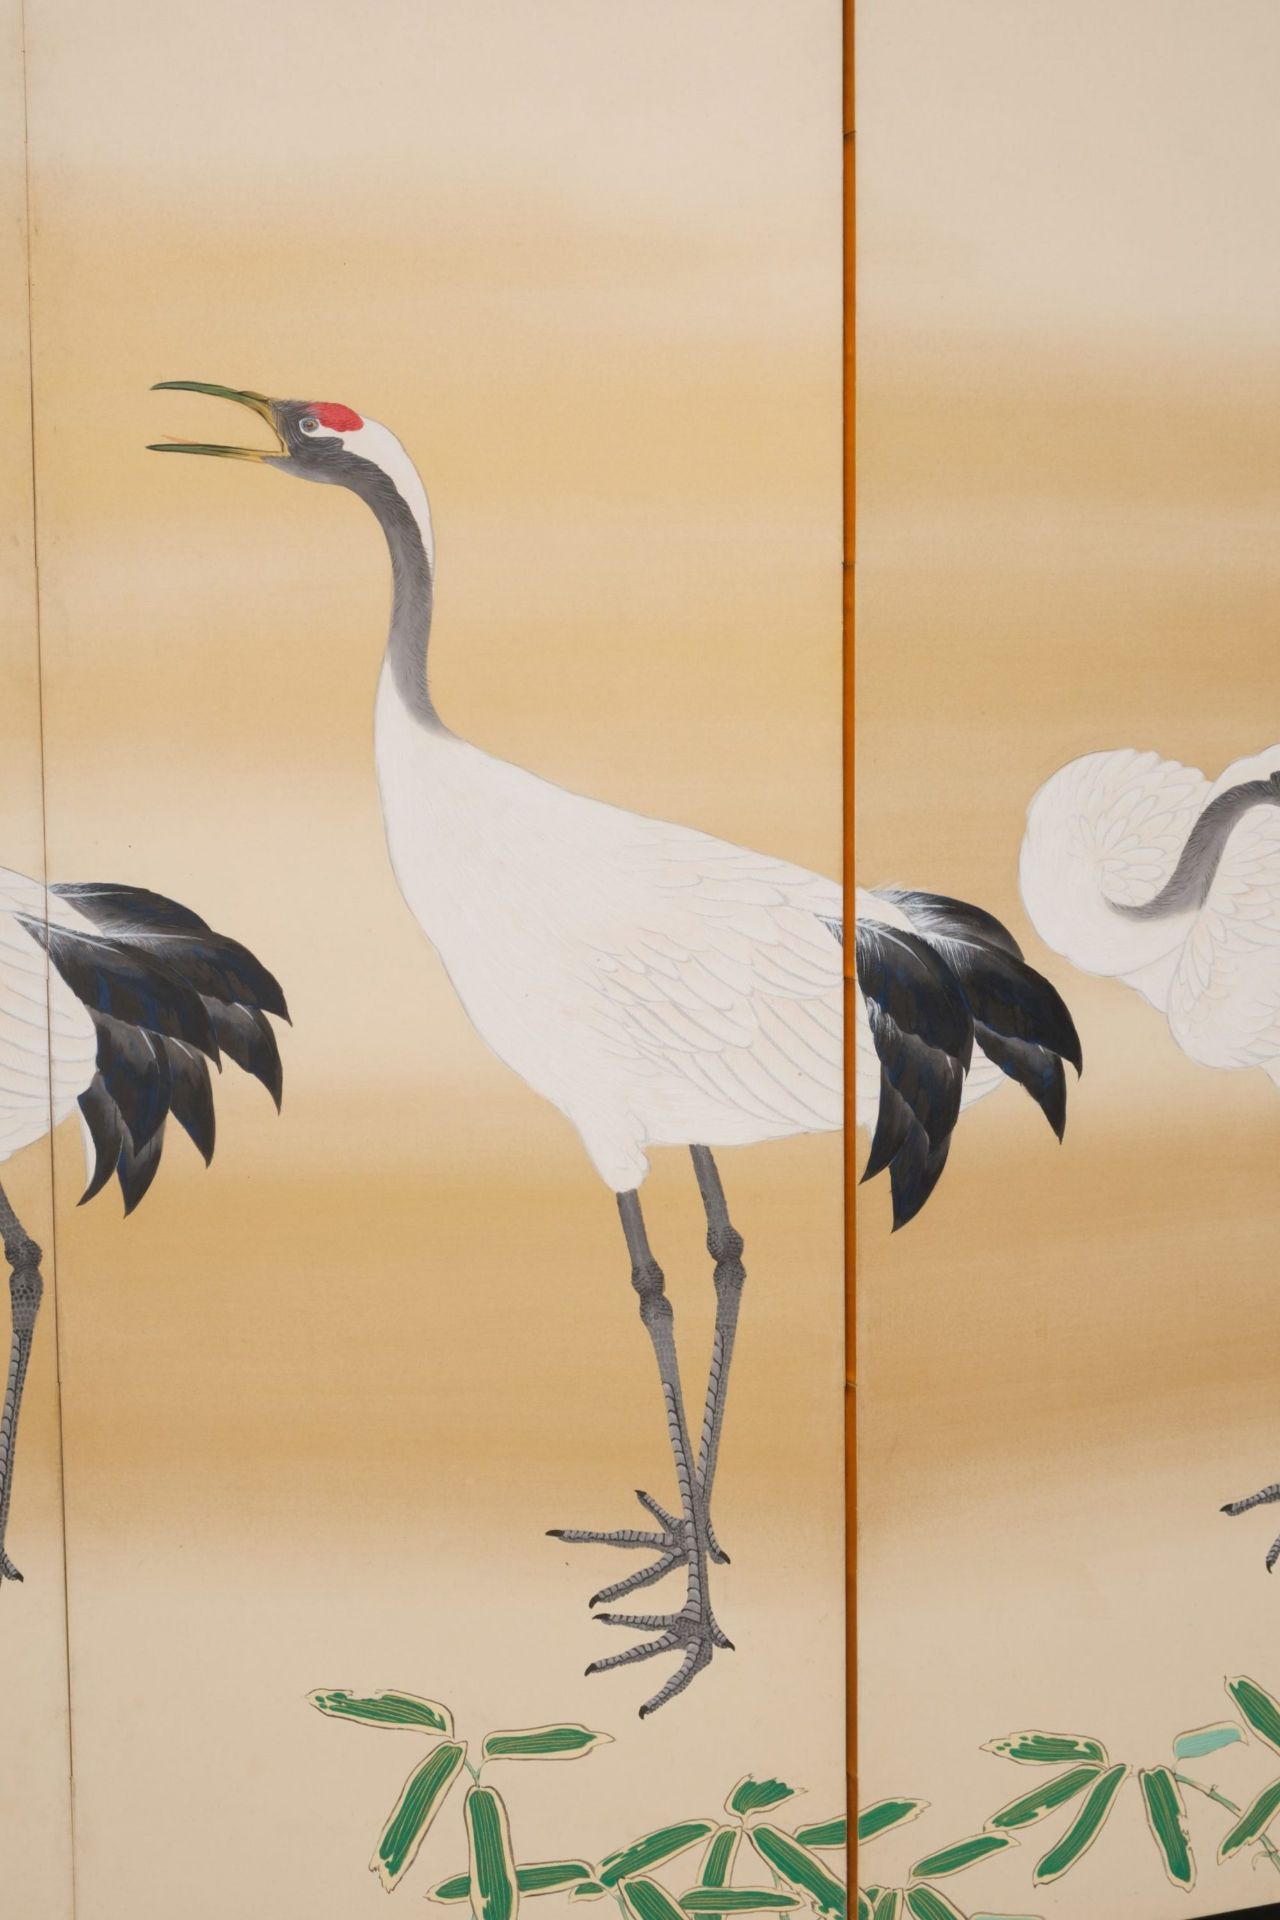 A JAPANESE MID-SIZE 6-PANEL RINPA STYLE BYÔBU (FOLDING SCREEN) WITH CRANES, FIRST HALF 20TH CENTURY - Image 6 of 13